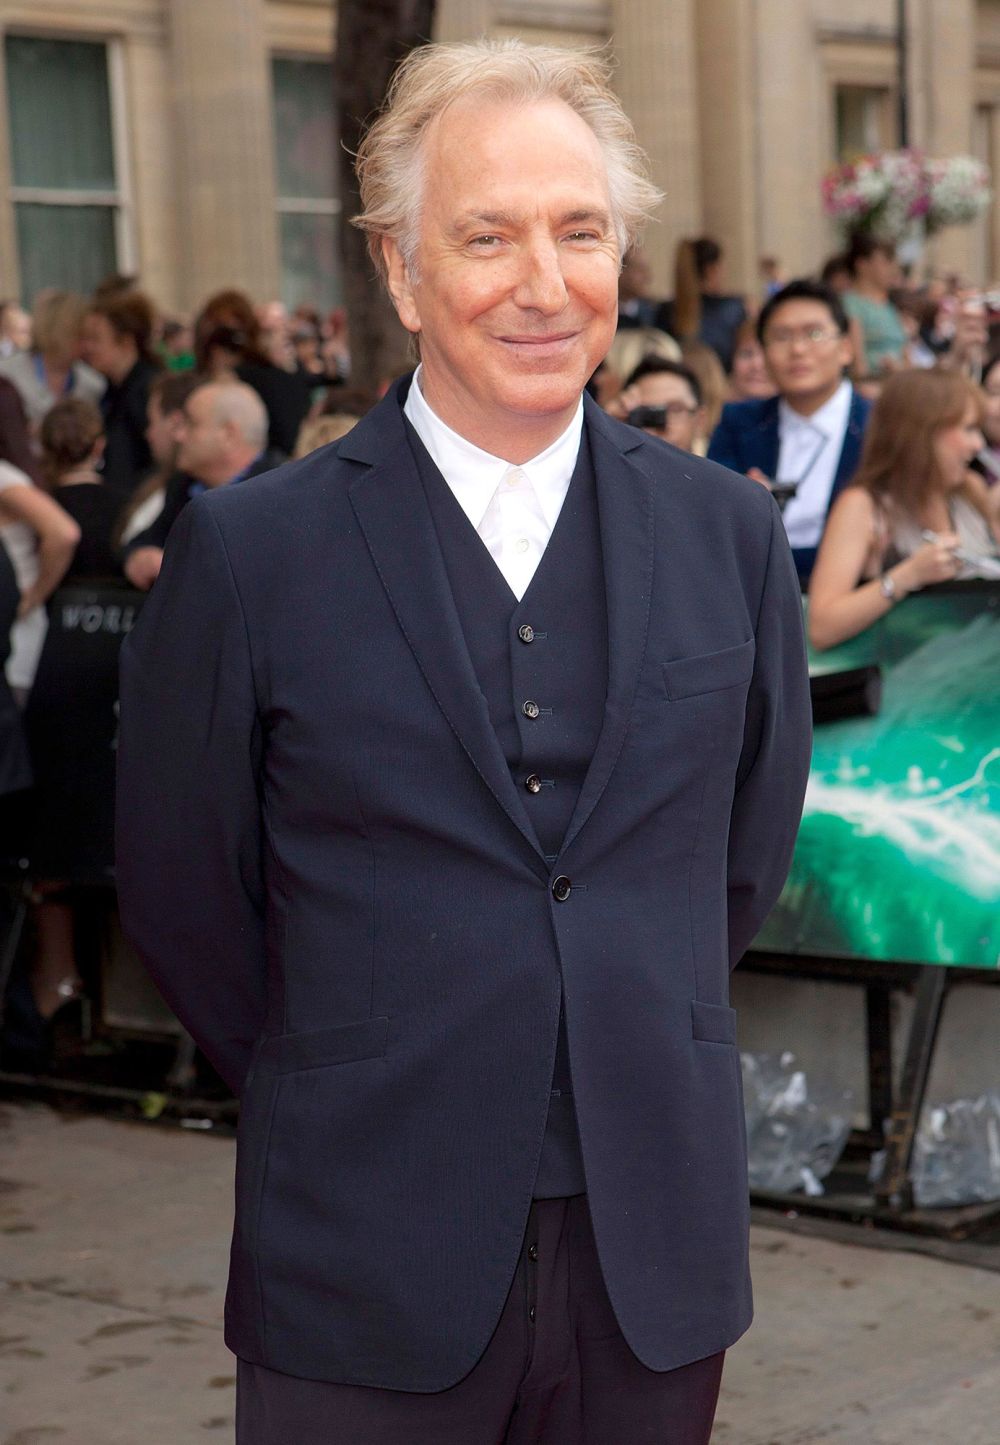 Alan Rickman Journal Reveals Why He Kept Working on Harry Potter Amid Cancer Battle